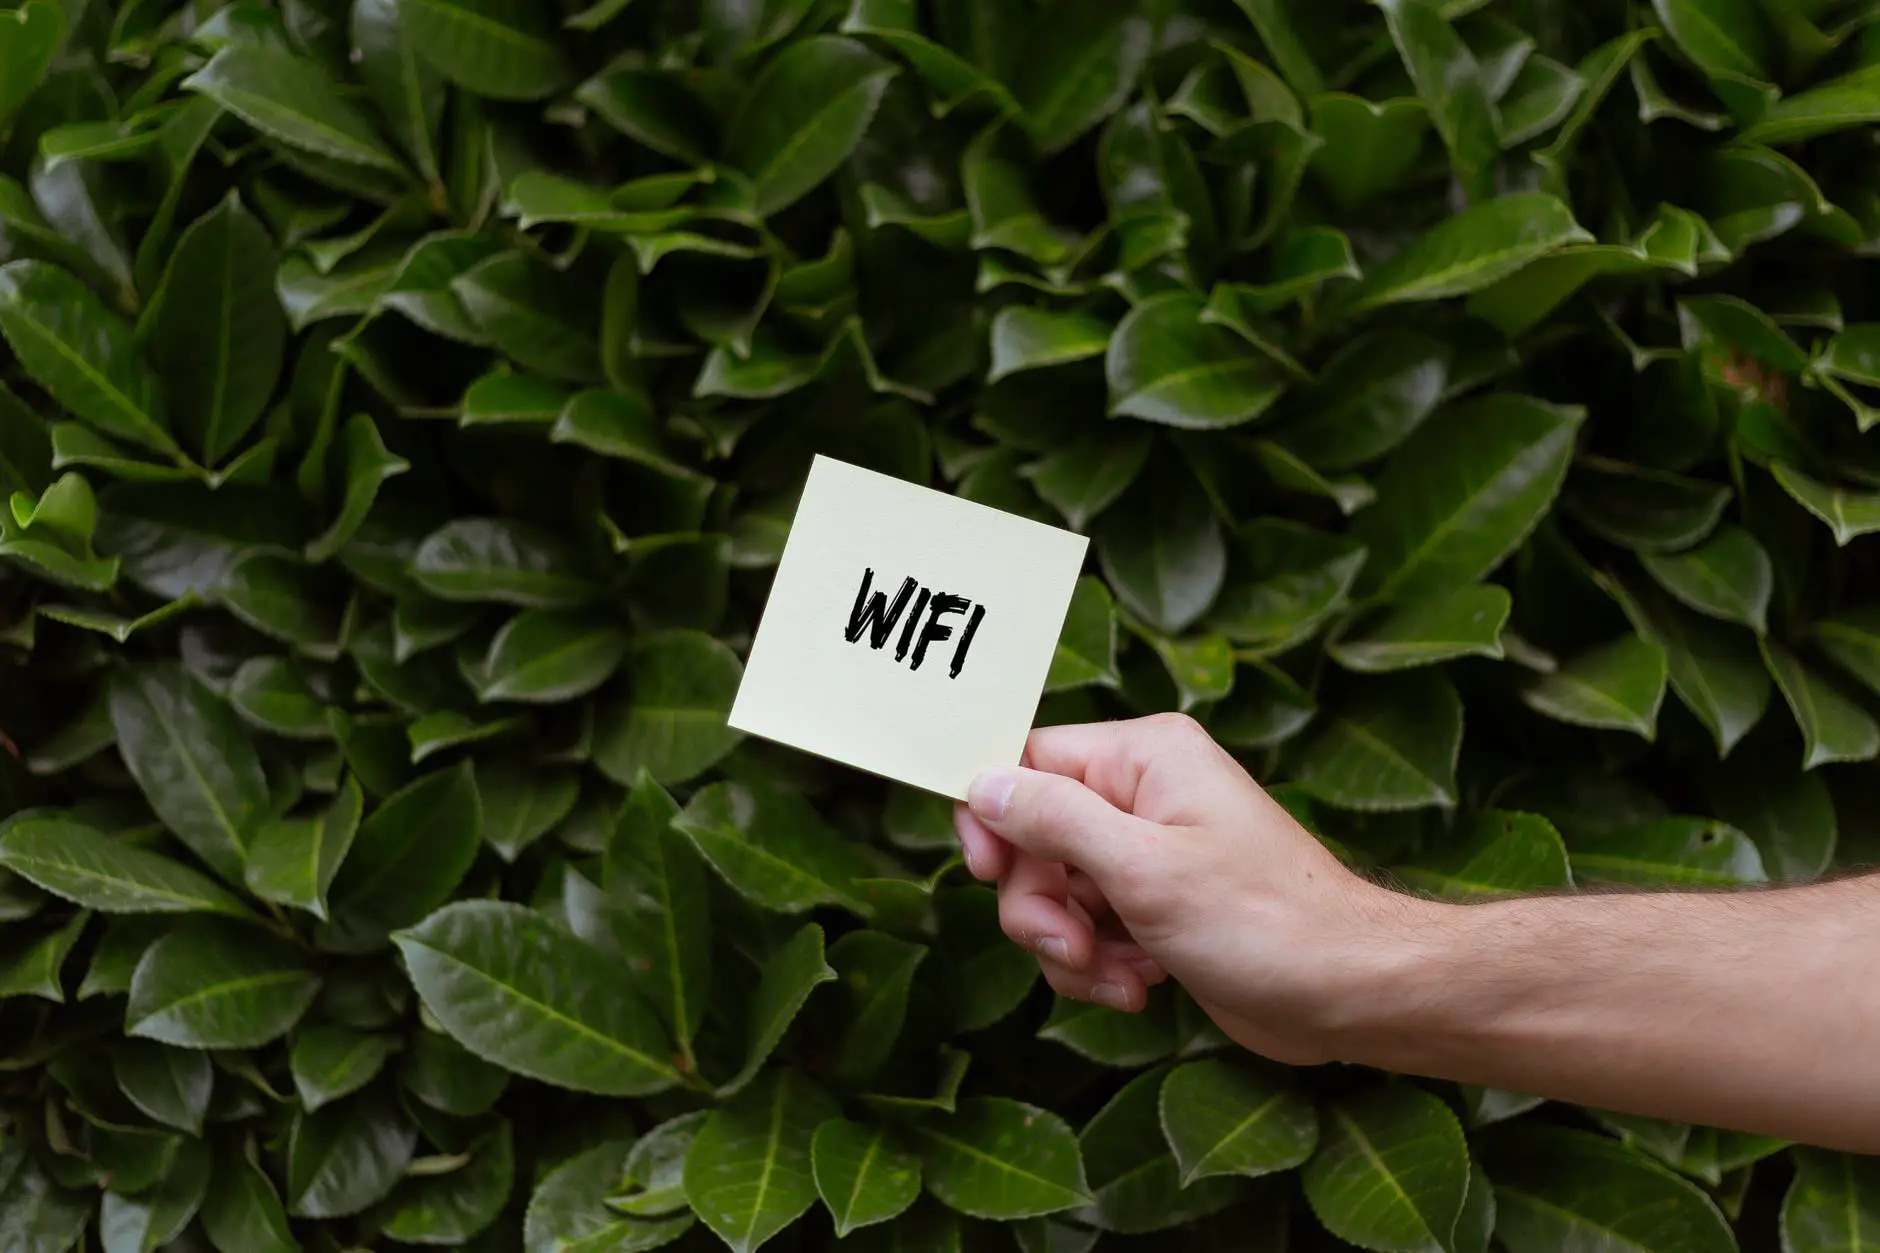 person holding a card with wifi text